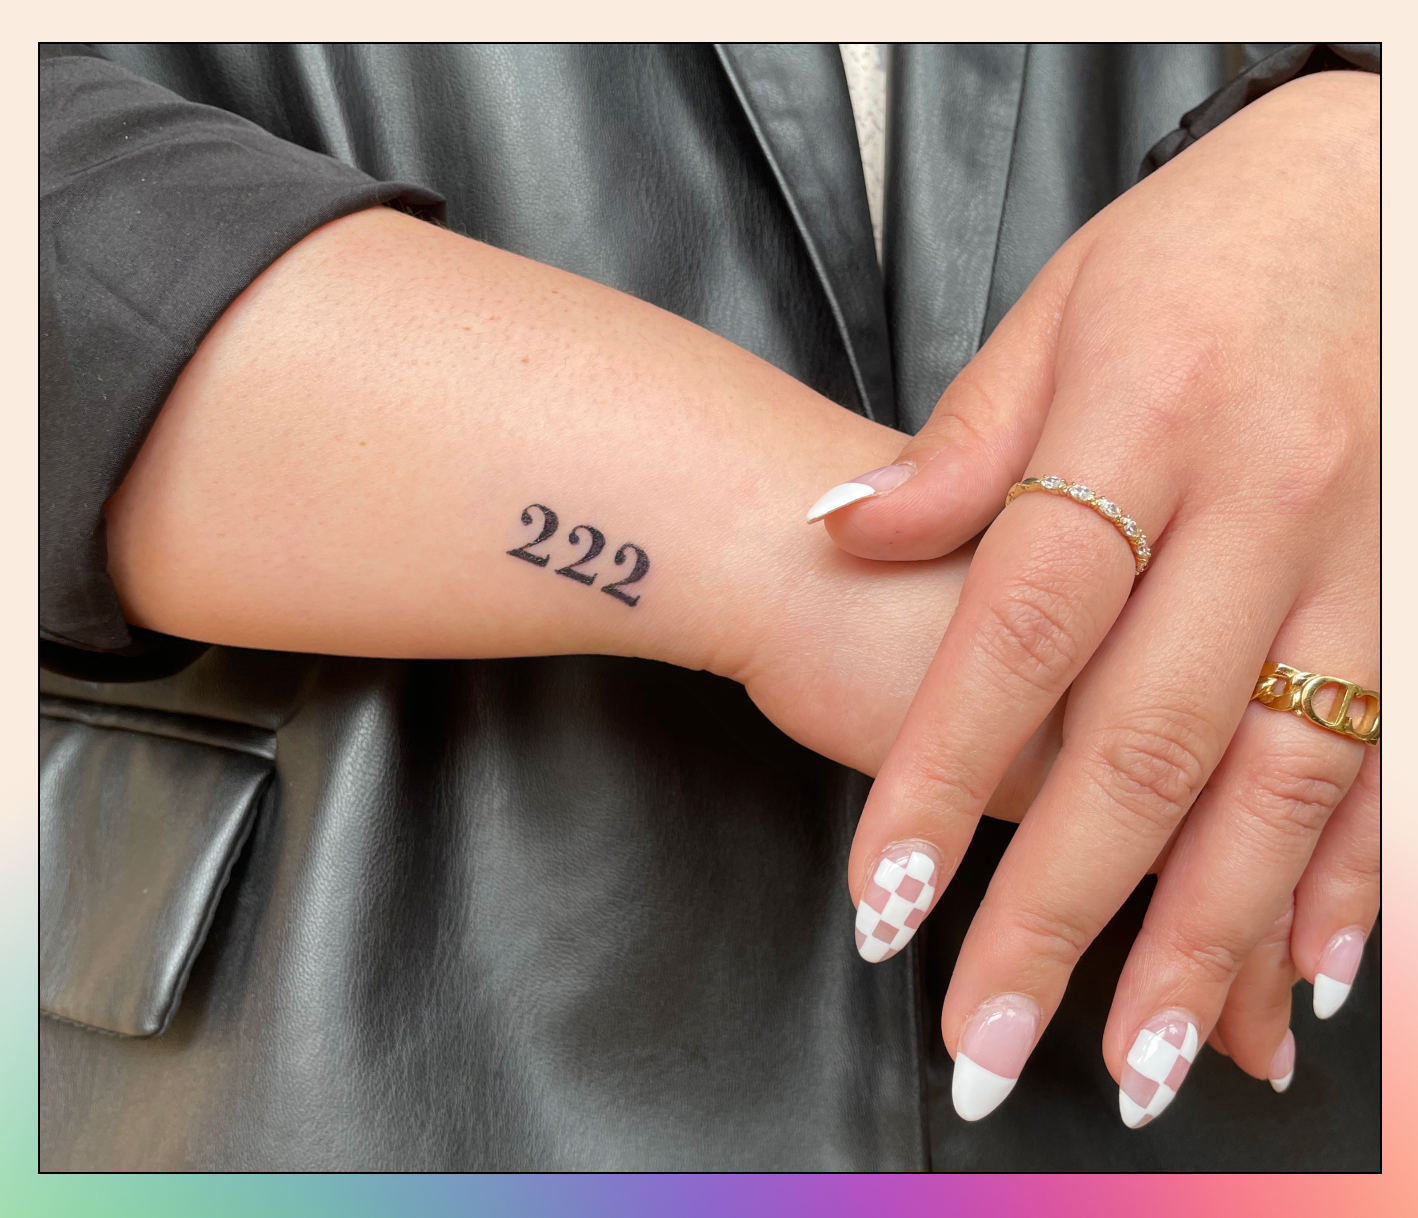 444 Number Temporary Tattoos set of 4 - Etsy